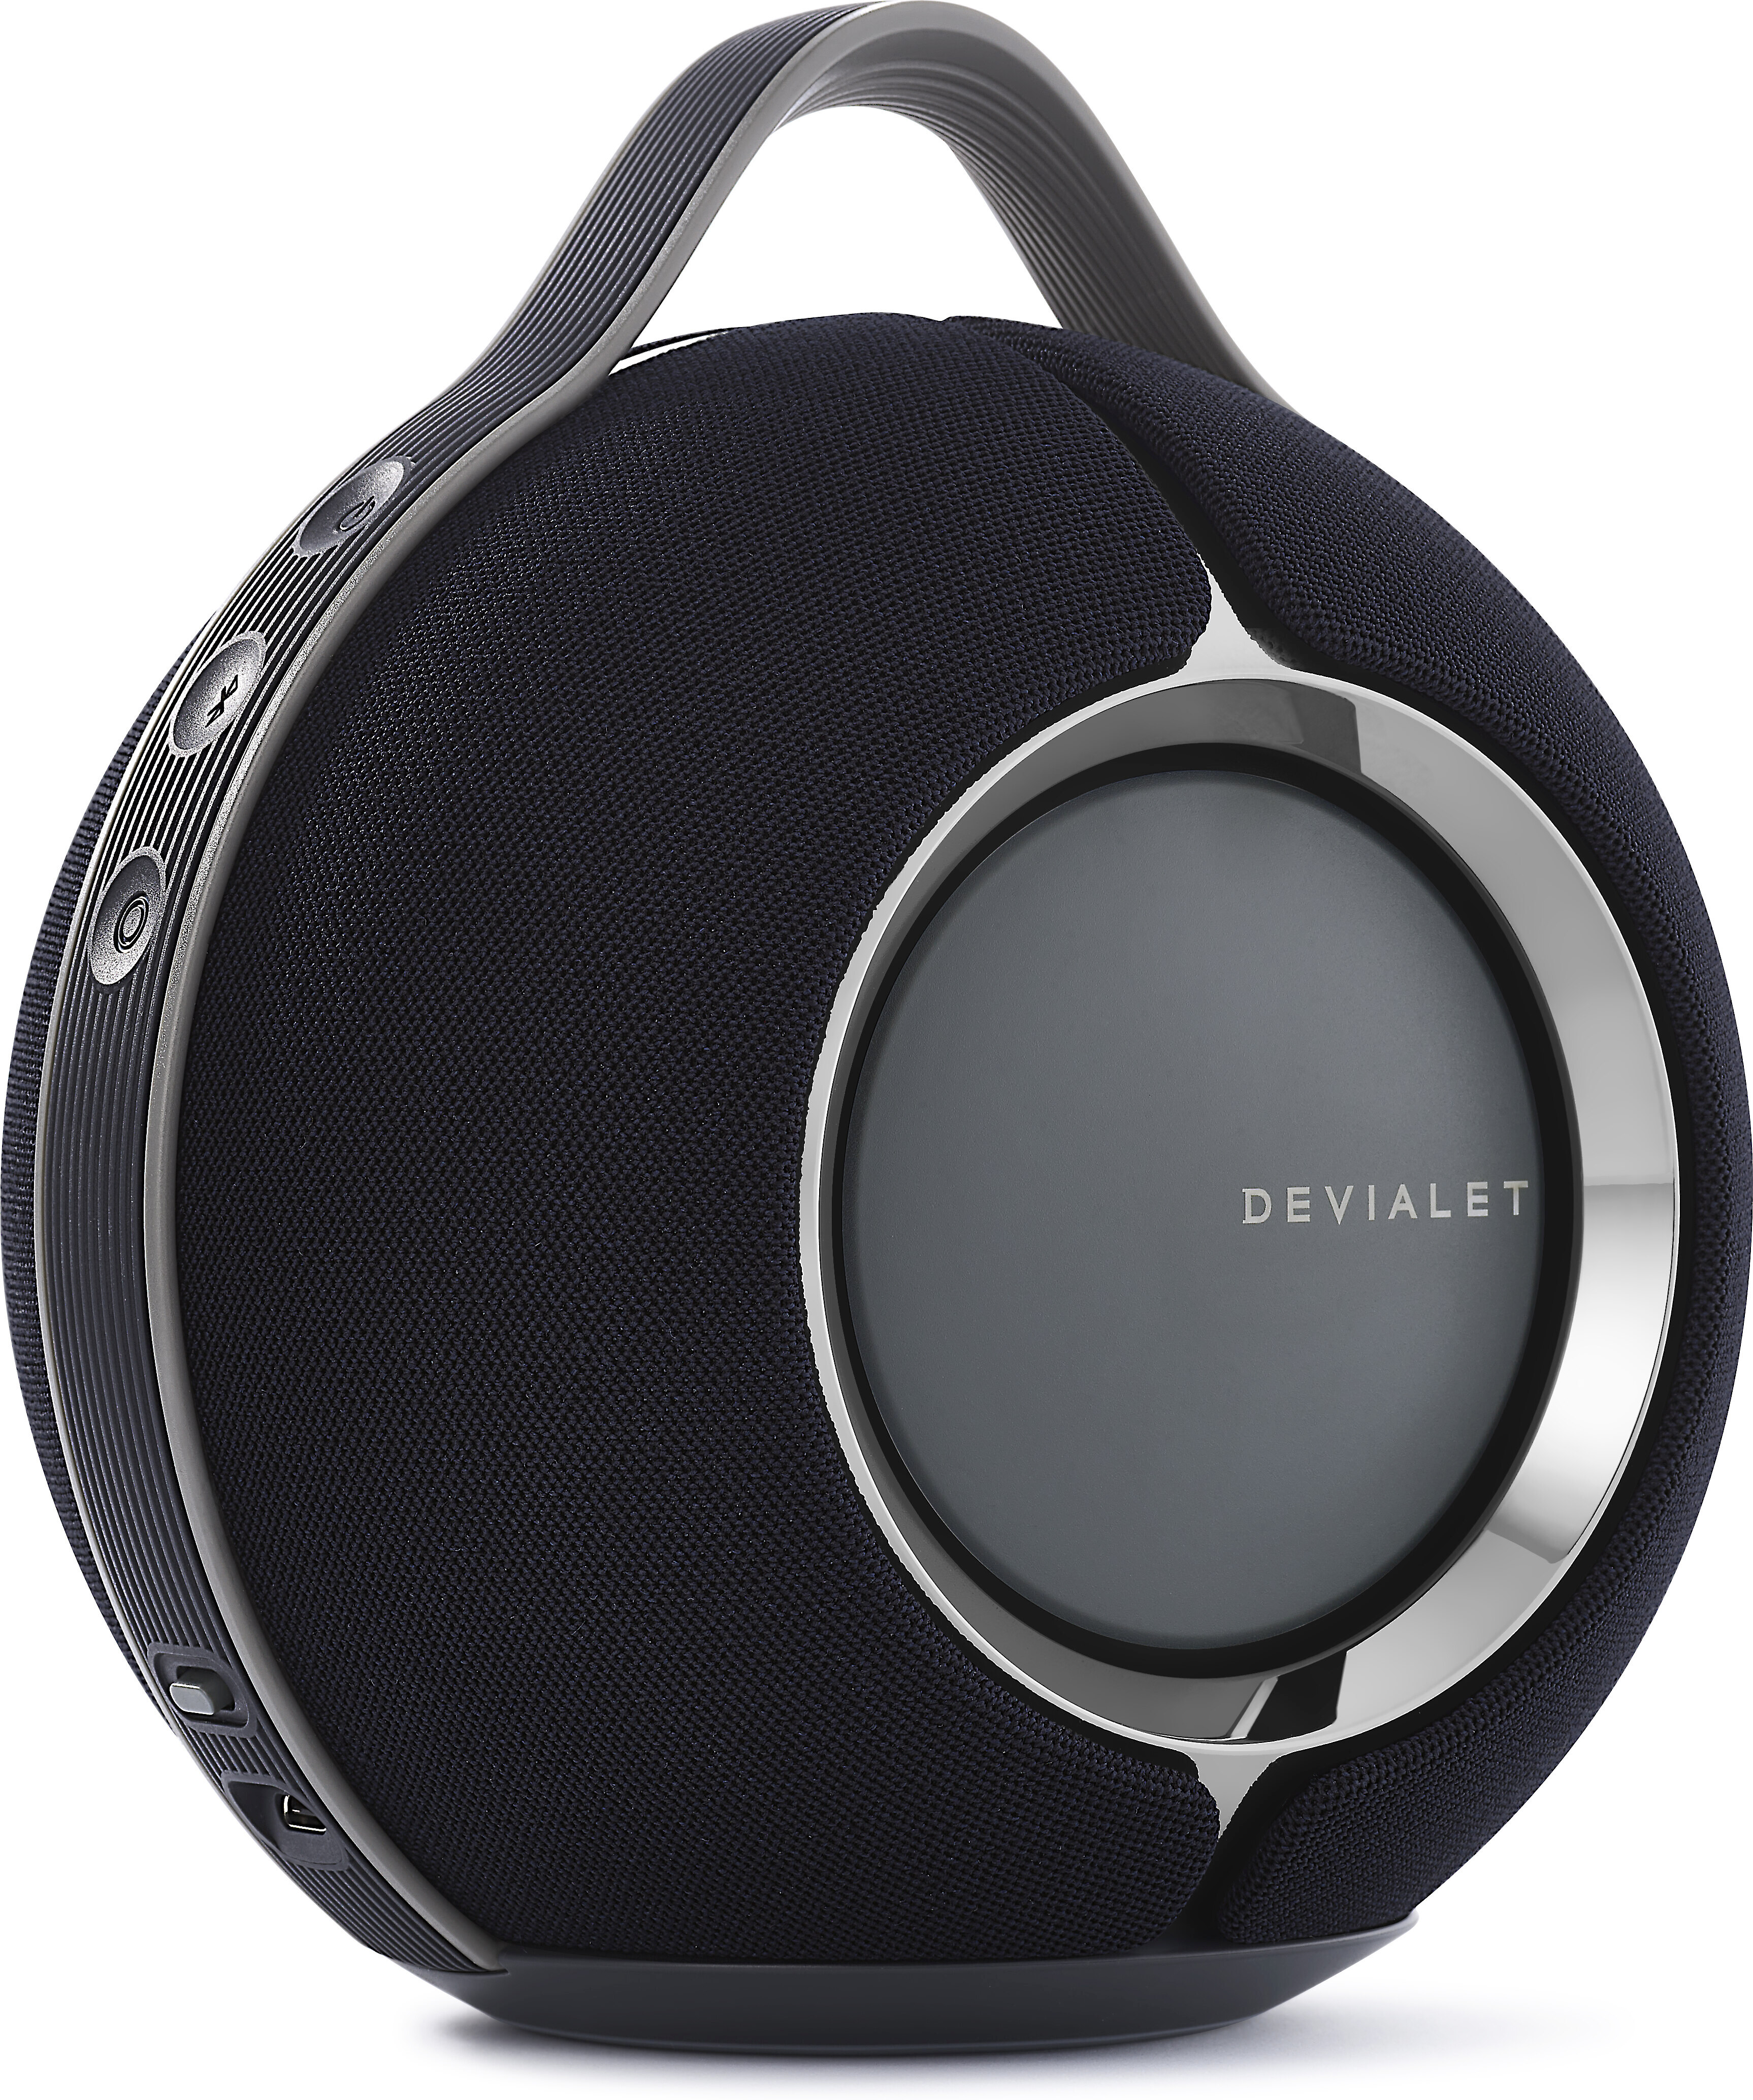 Devialet Mania Review: Bottom-Heavy, But Powerful